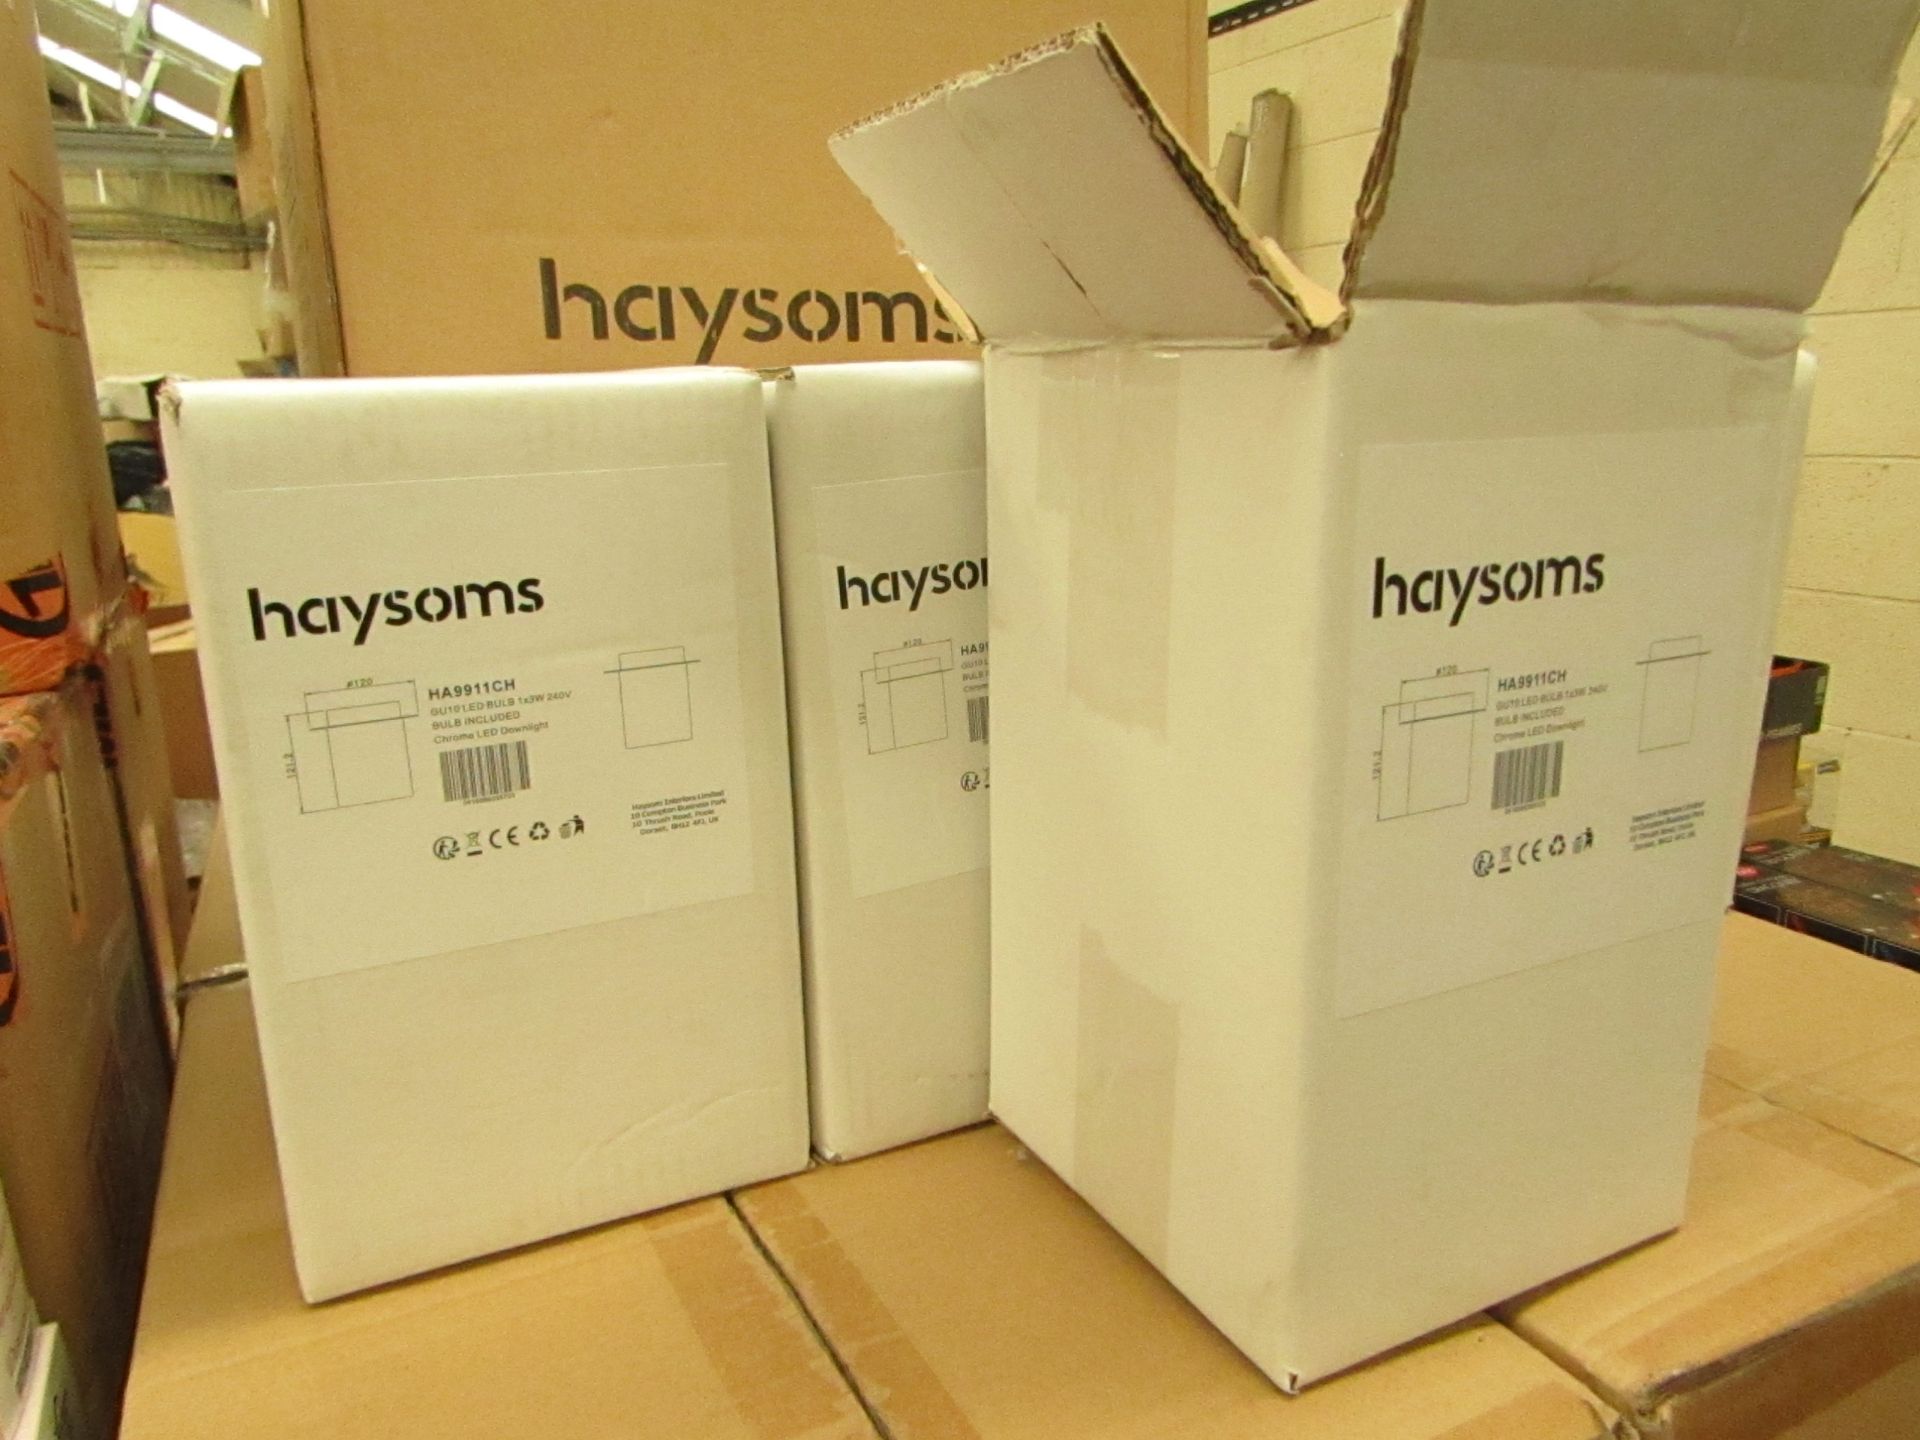 2x Haysoms - Chrome LED Downlight, Includes GU10 LED Bulb - New & Boxed.